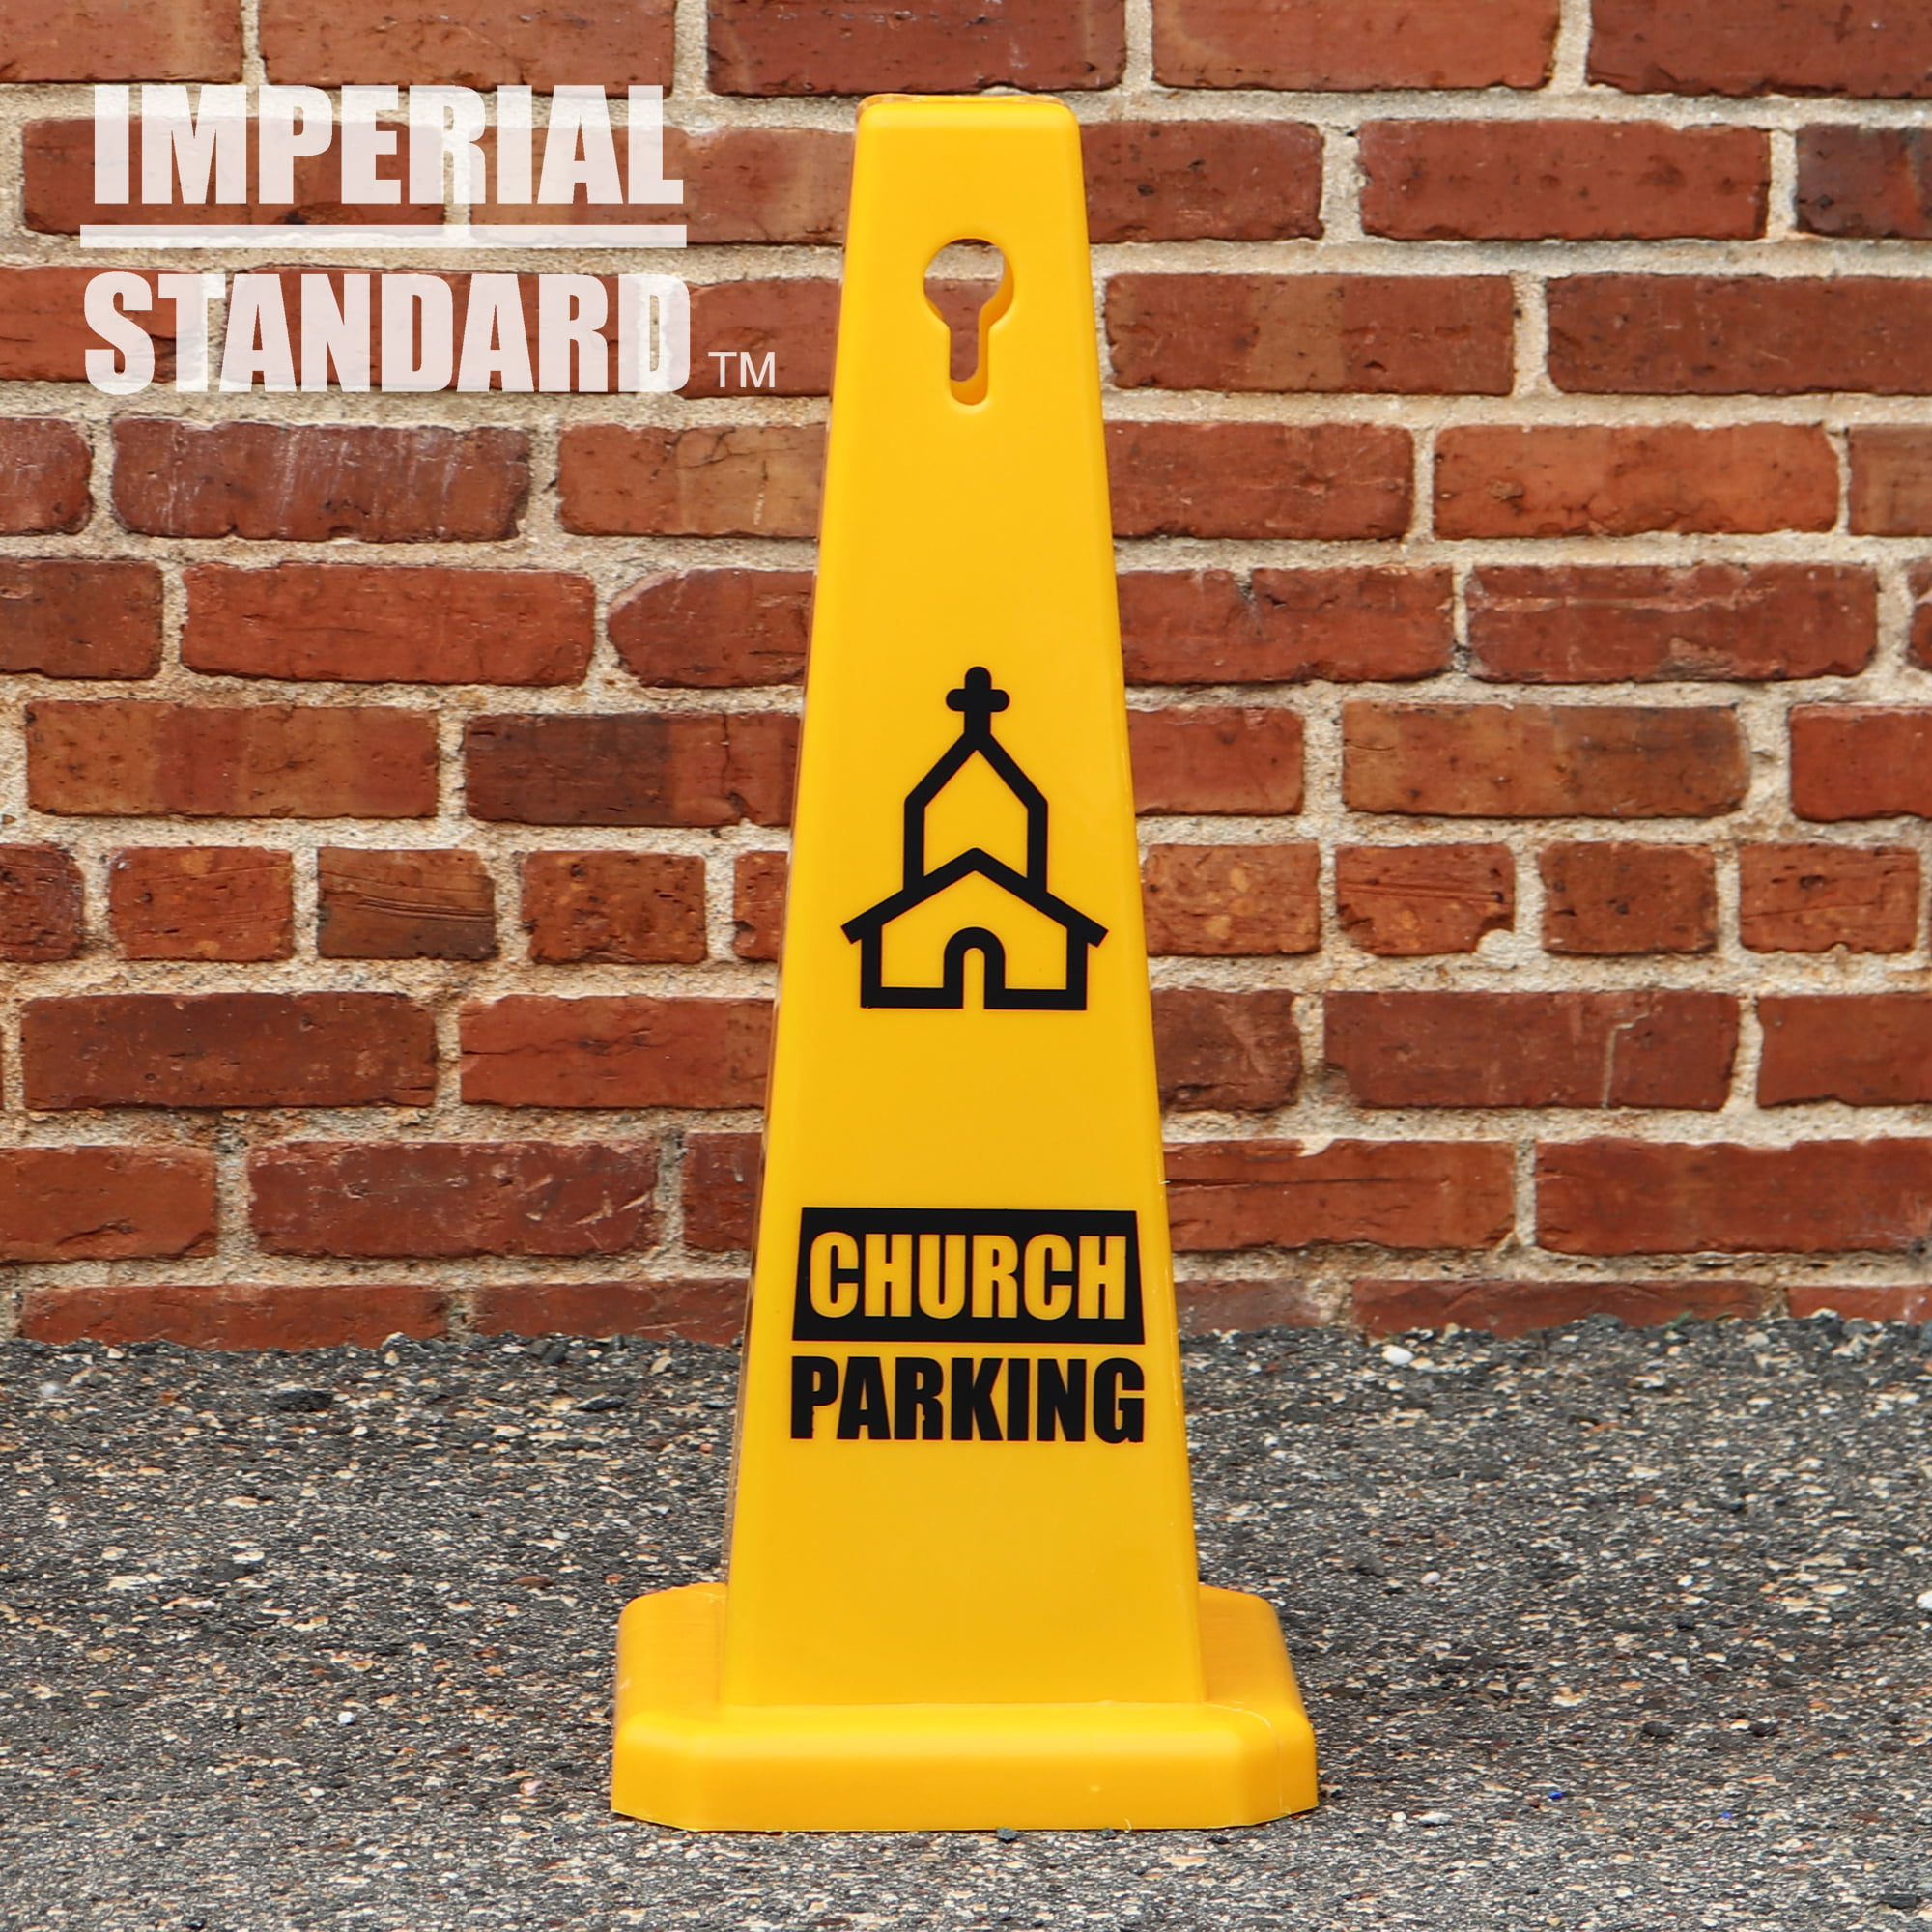 Parking Cones 28 Yellow Cones with Church Parking Signs Street Cones Construction Cones Church Parking Cones 2 Pack Safety Cones